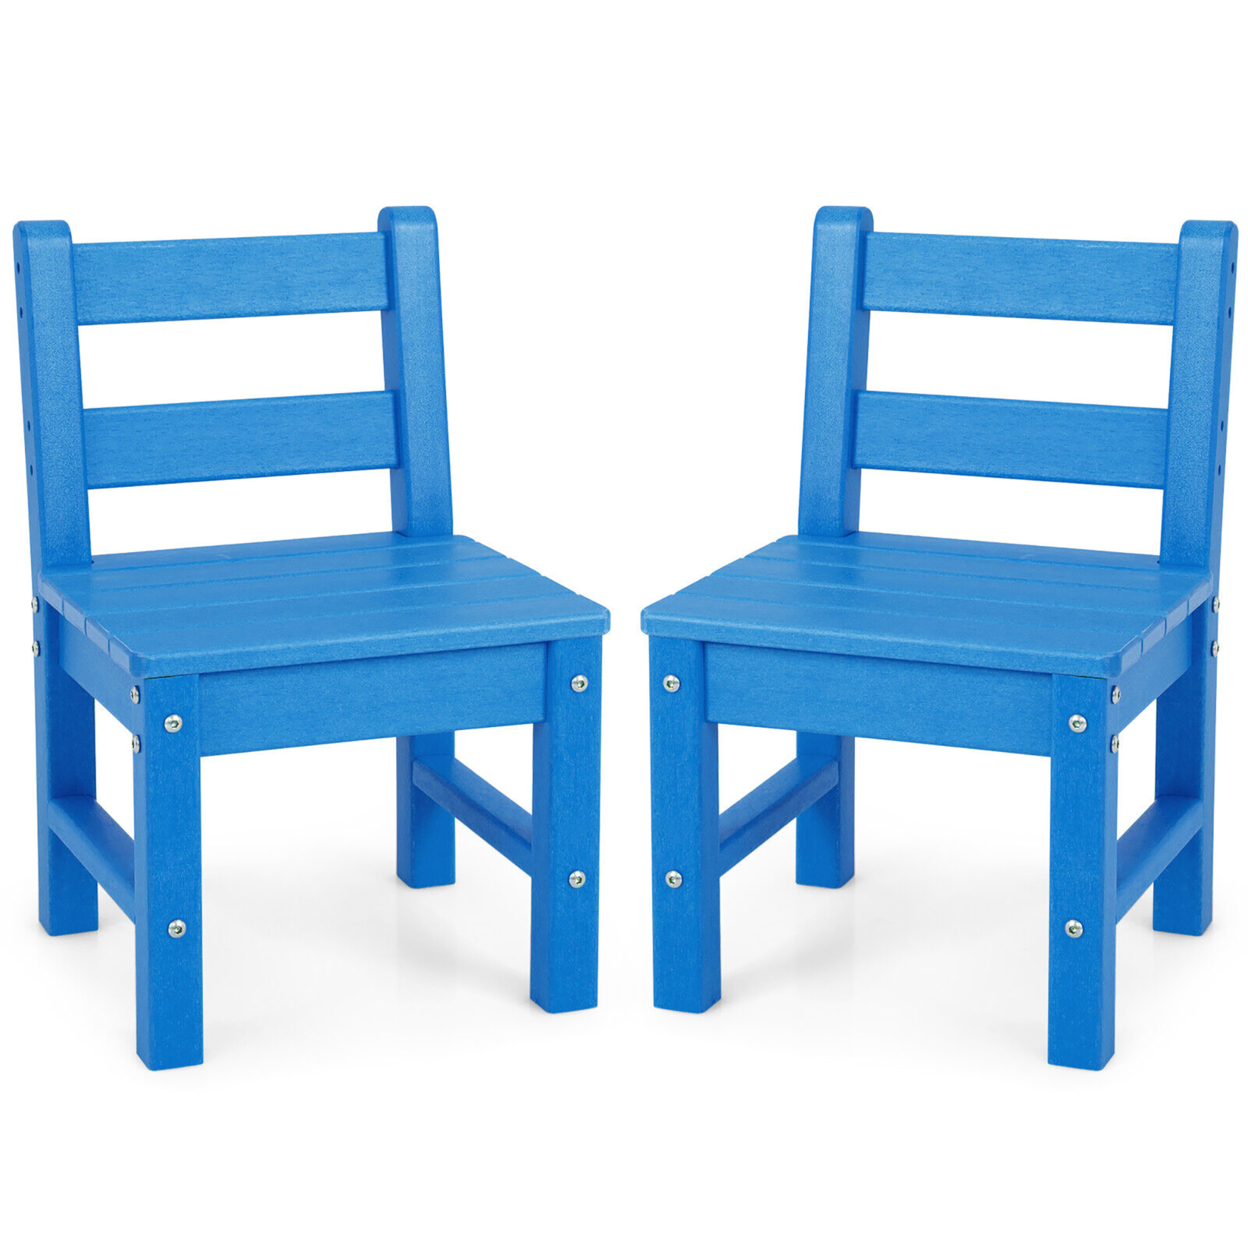 2 PCS Kids Chairs Indoor Outdoor Heavy-Duty All-Weather Children Learning Chair - Blue